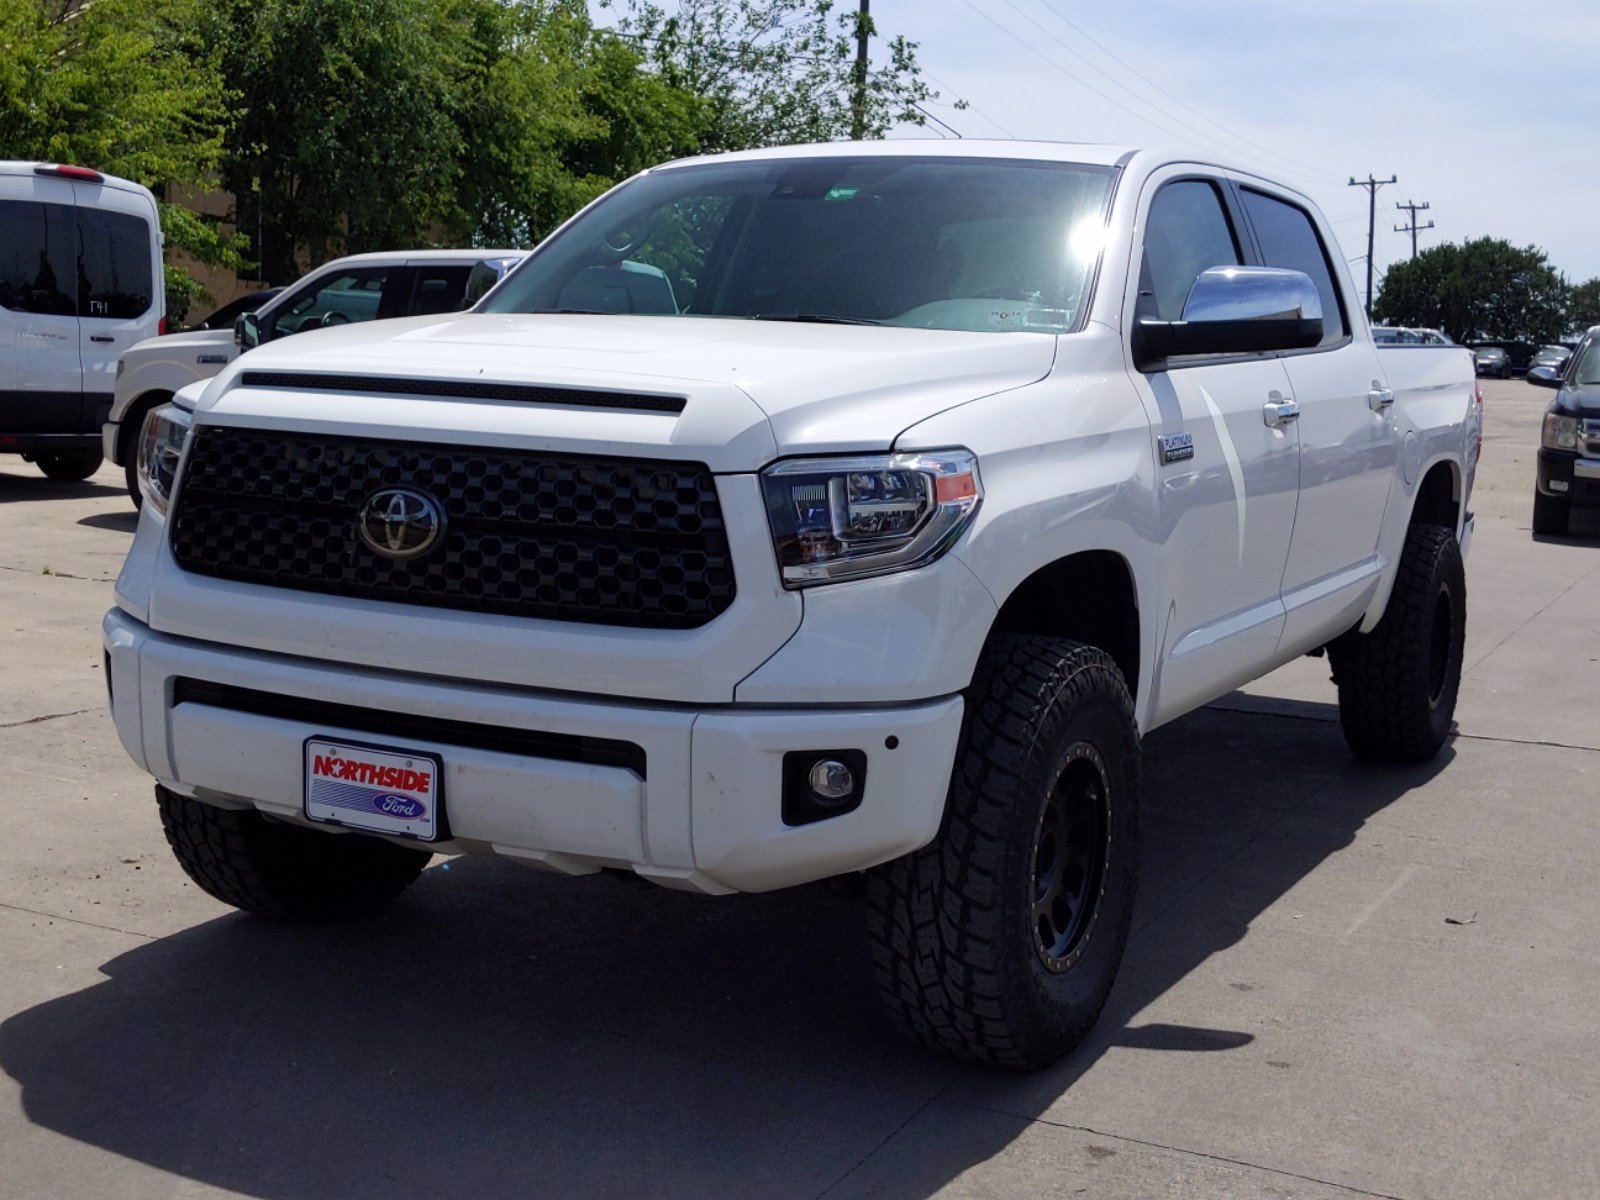 Pre-Owned 2020 Toyota Tundra 4WD Platinum Crew Cab Pickup in San